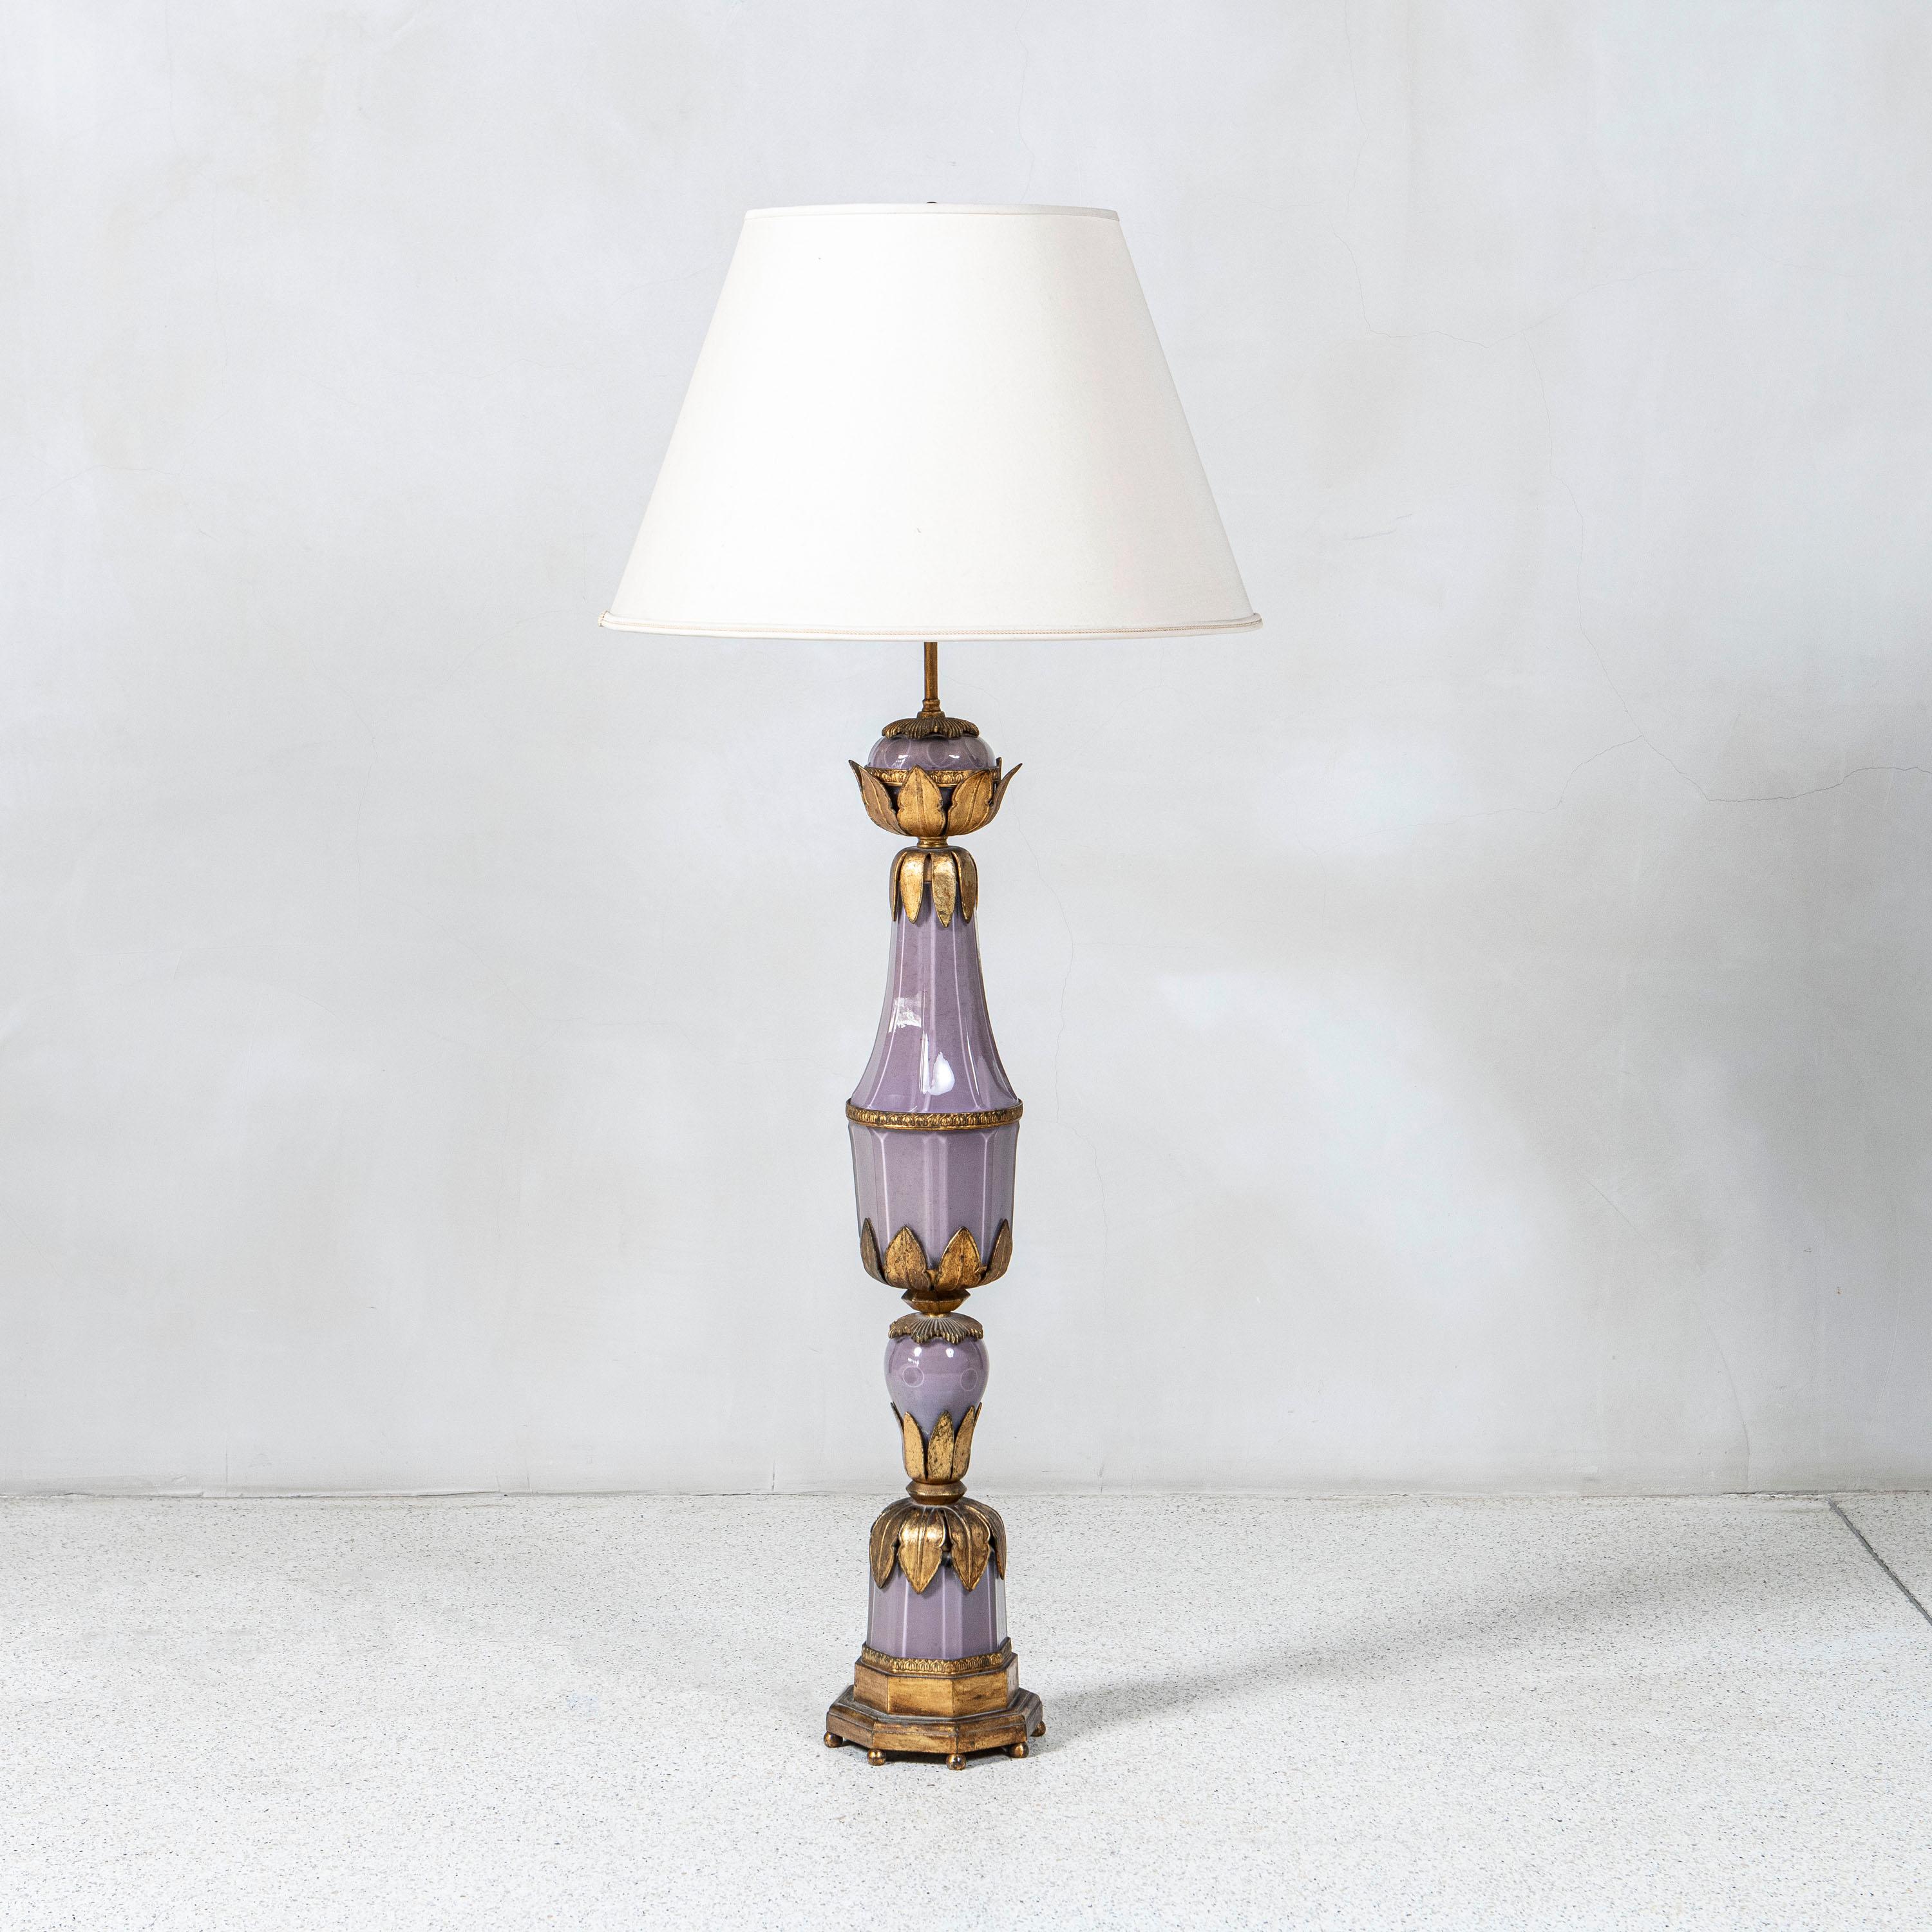 Mid-Century Modern Pair of Bronze and Glass Table Lamps Maison Jansen, France, circa 1940-1950 For Sale